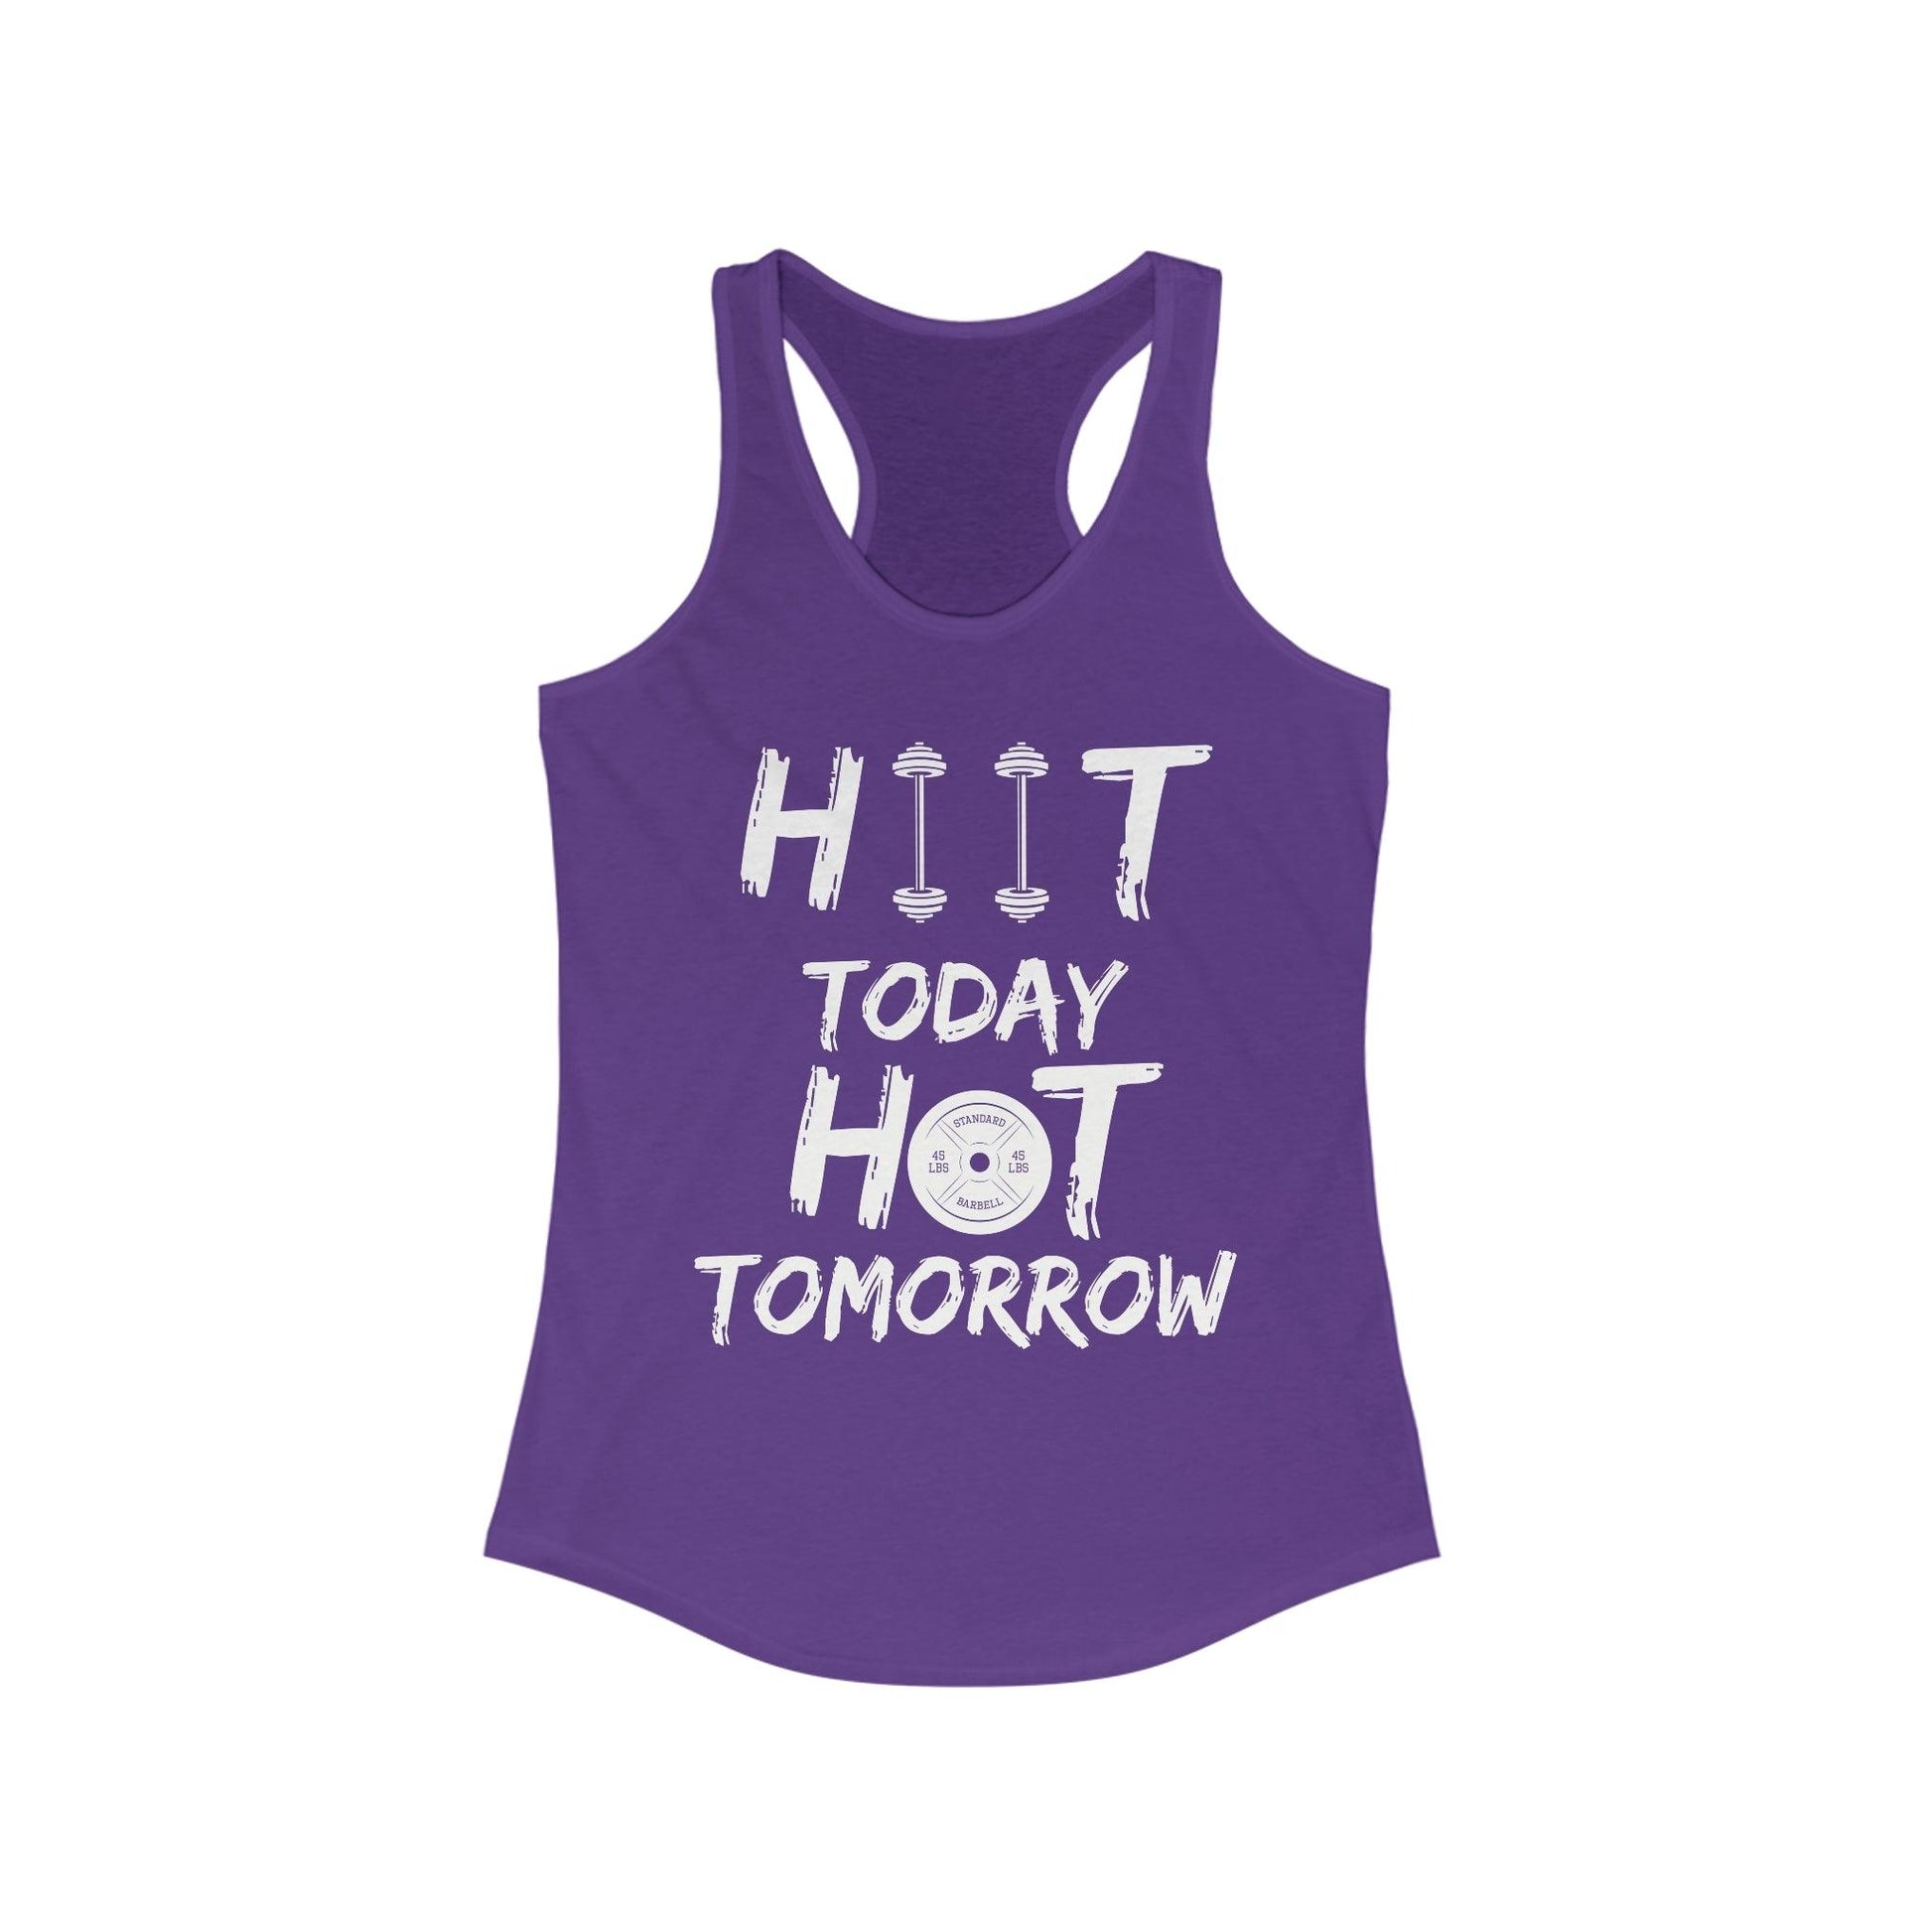 HIIT and Hot Workout Tank Top for Women - Basically Beachy